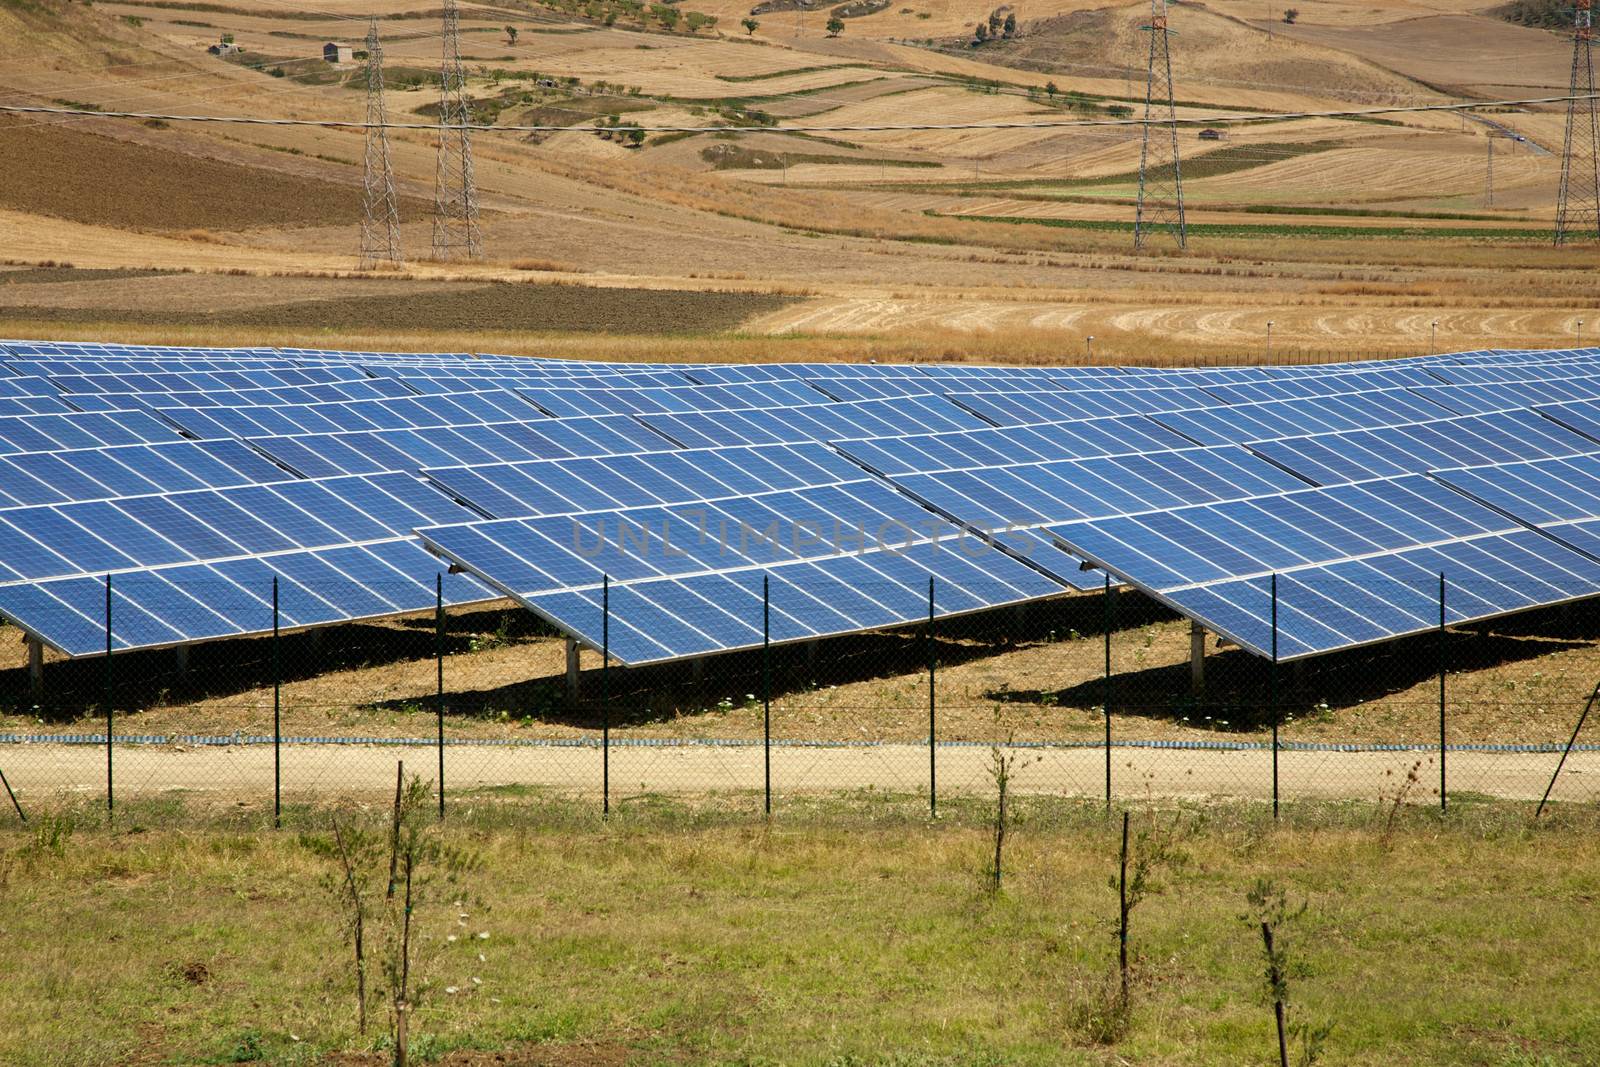 Solar panels in Sicily. On the road to Agrigento